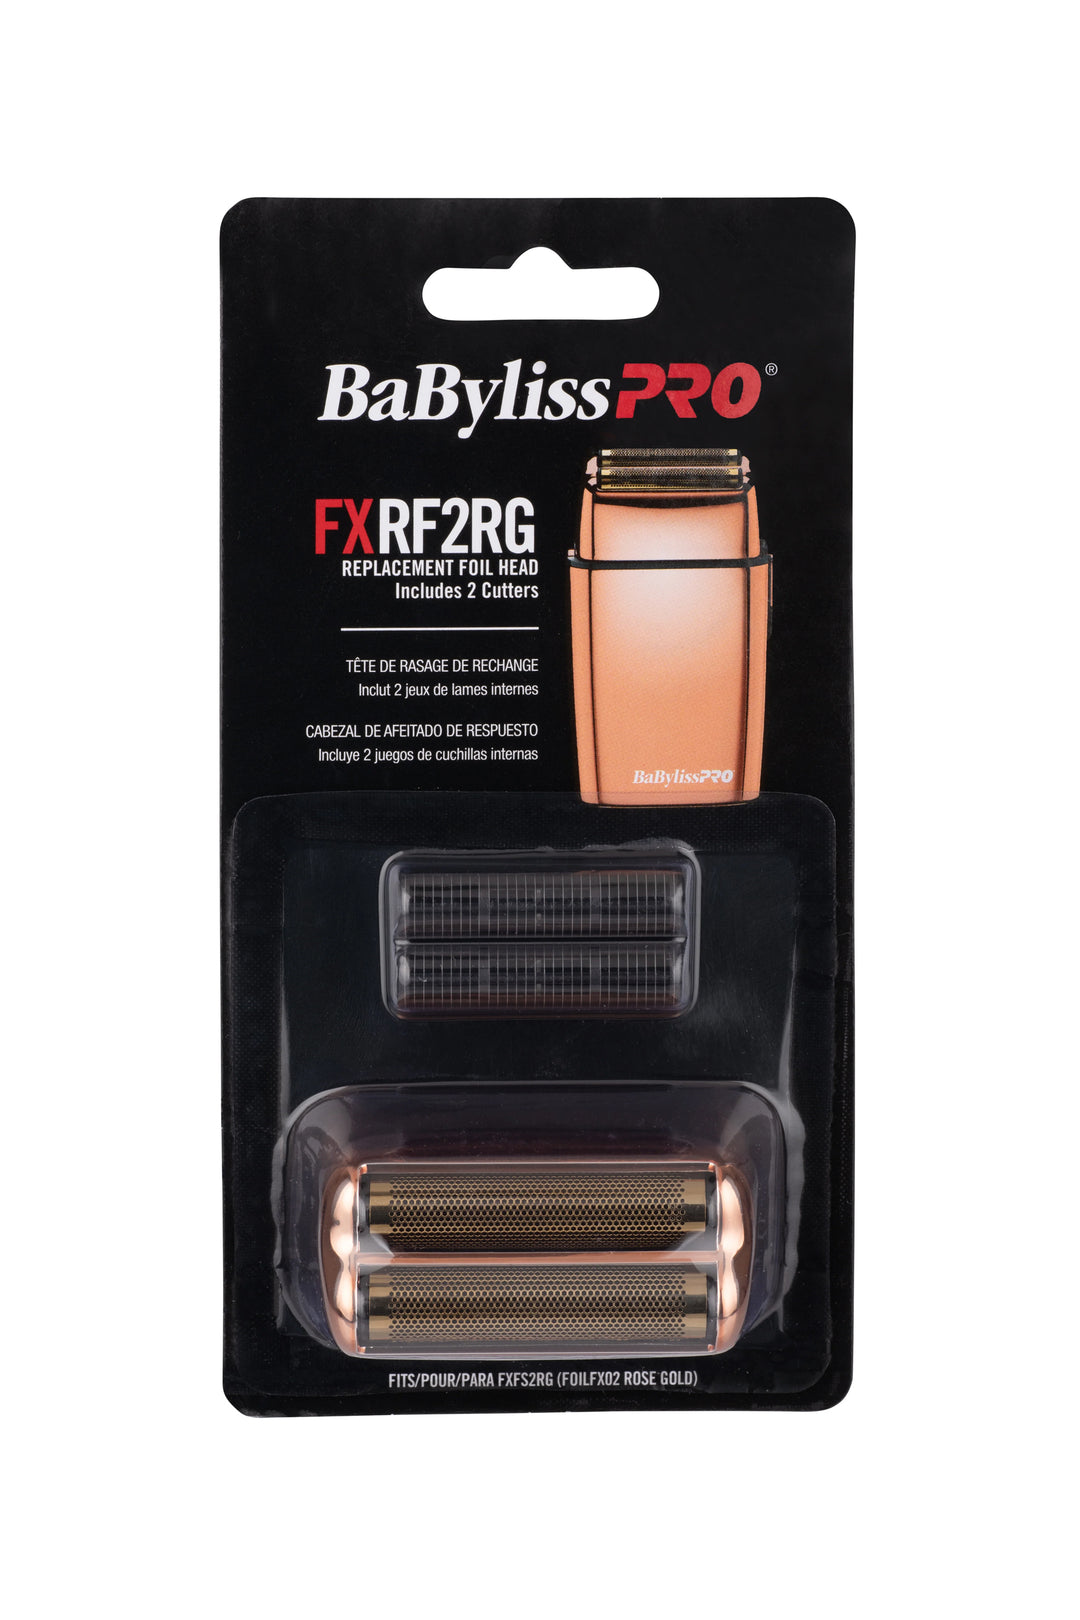 BABYLISS PRO FXRF2RG REPLACEMENT FOIL HEAD - INCLUDES 2 CUTTERS (ROSE GOLD)